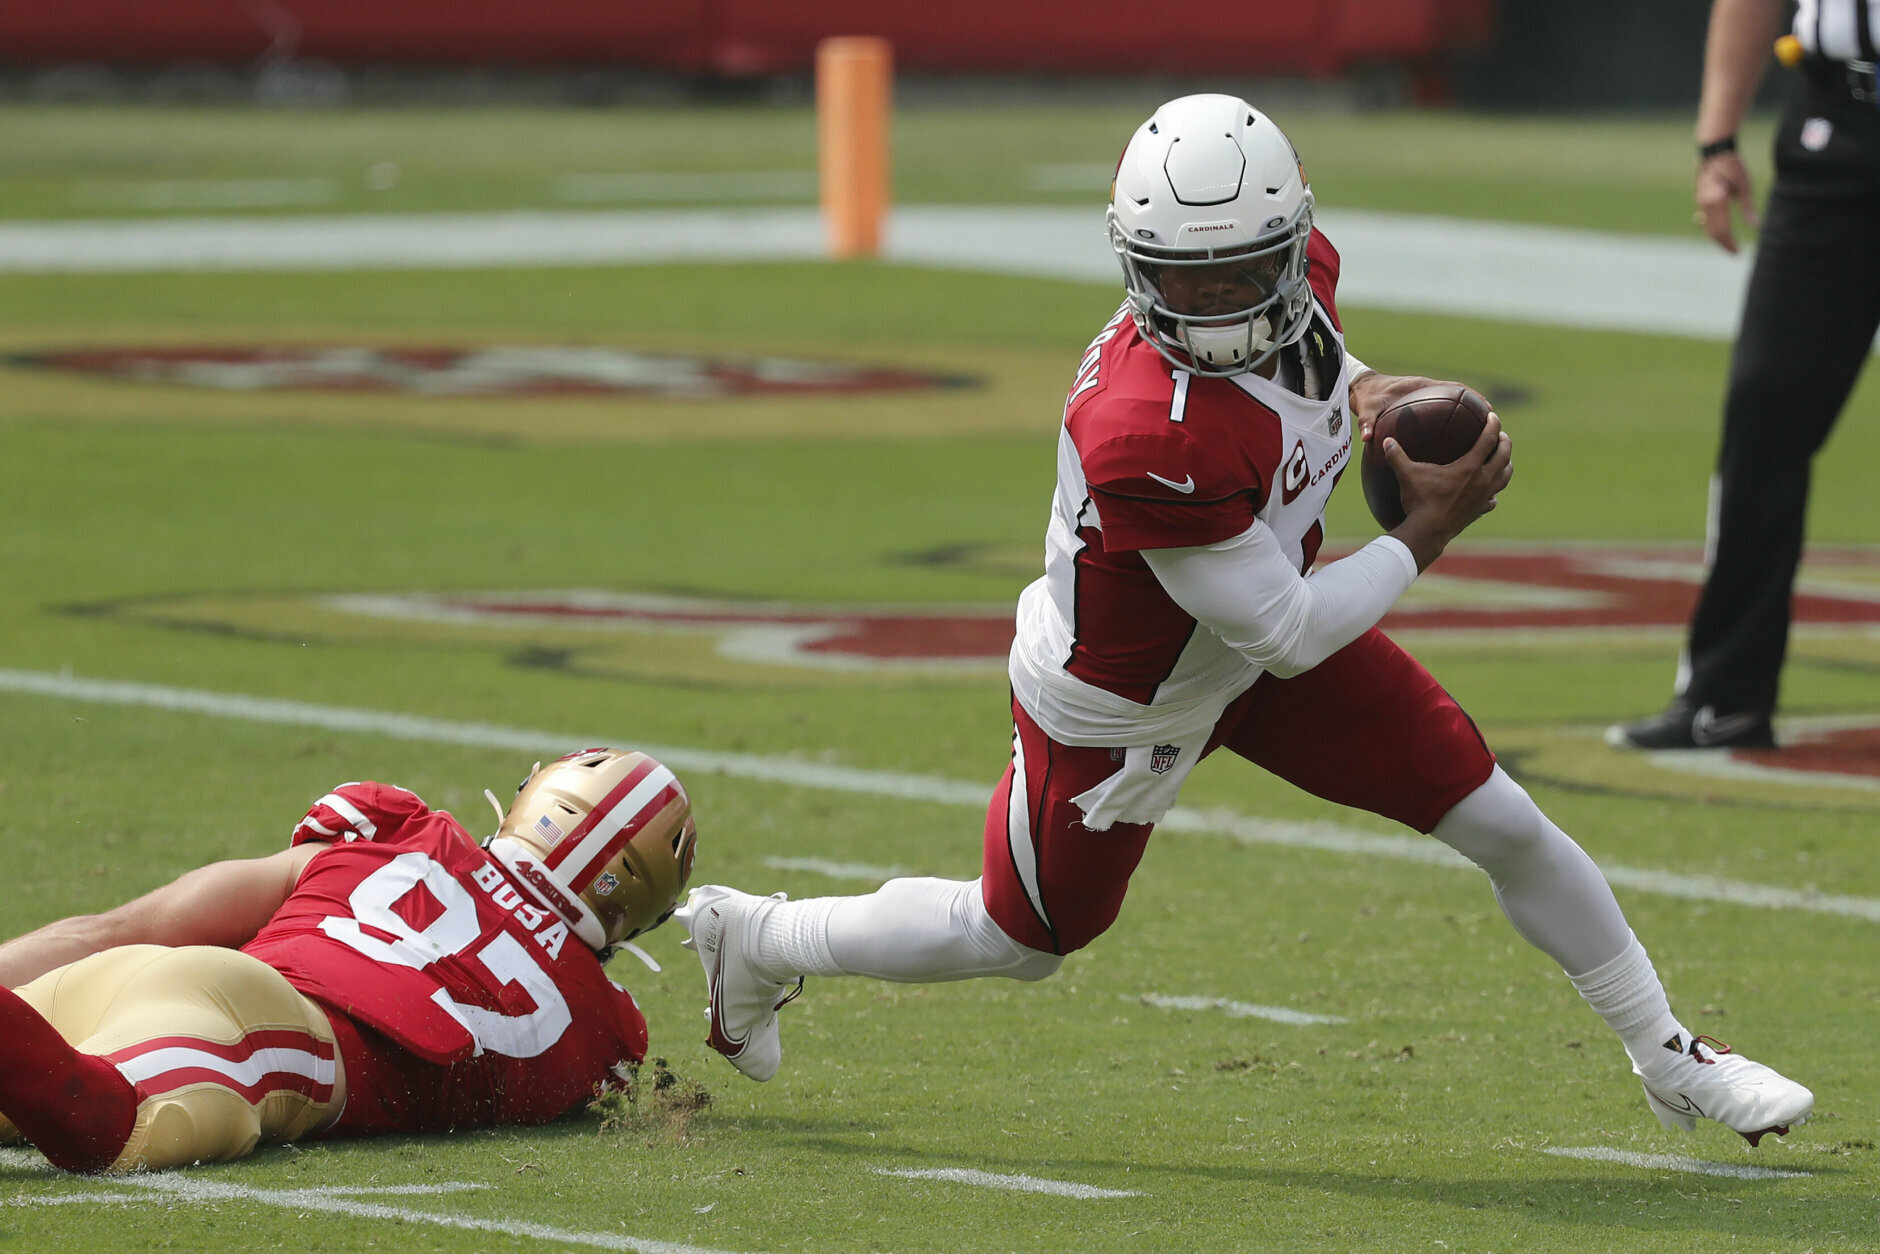 <p><b><i>Cardinals 24</i></b><br />
<b><i>49ers 20</i></b></p>
<p>Given the way Kyler Murray gives the 49ers fits and his immediate connection with DeAndre Hopkins (career-high 14 catches for 151 yards in his Cardinals debut), I&#8217;m feeling really good about <a href="https://wtop.com/gallery/nfl/2020-nfl-awards-predictions/">my MVP pick</a>.</p>
